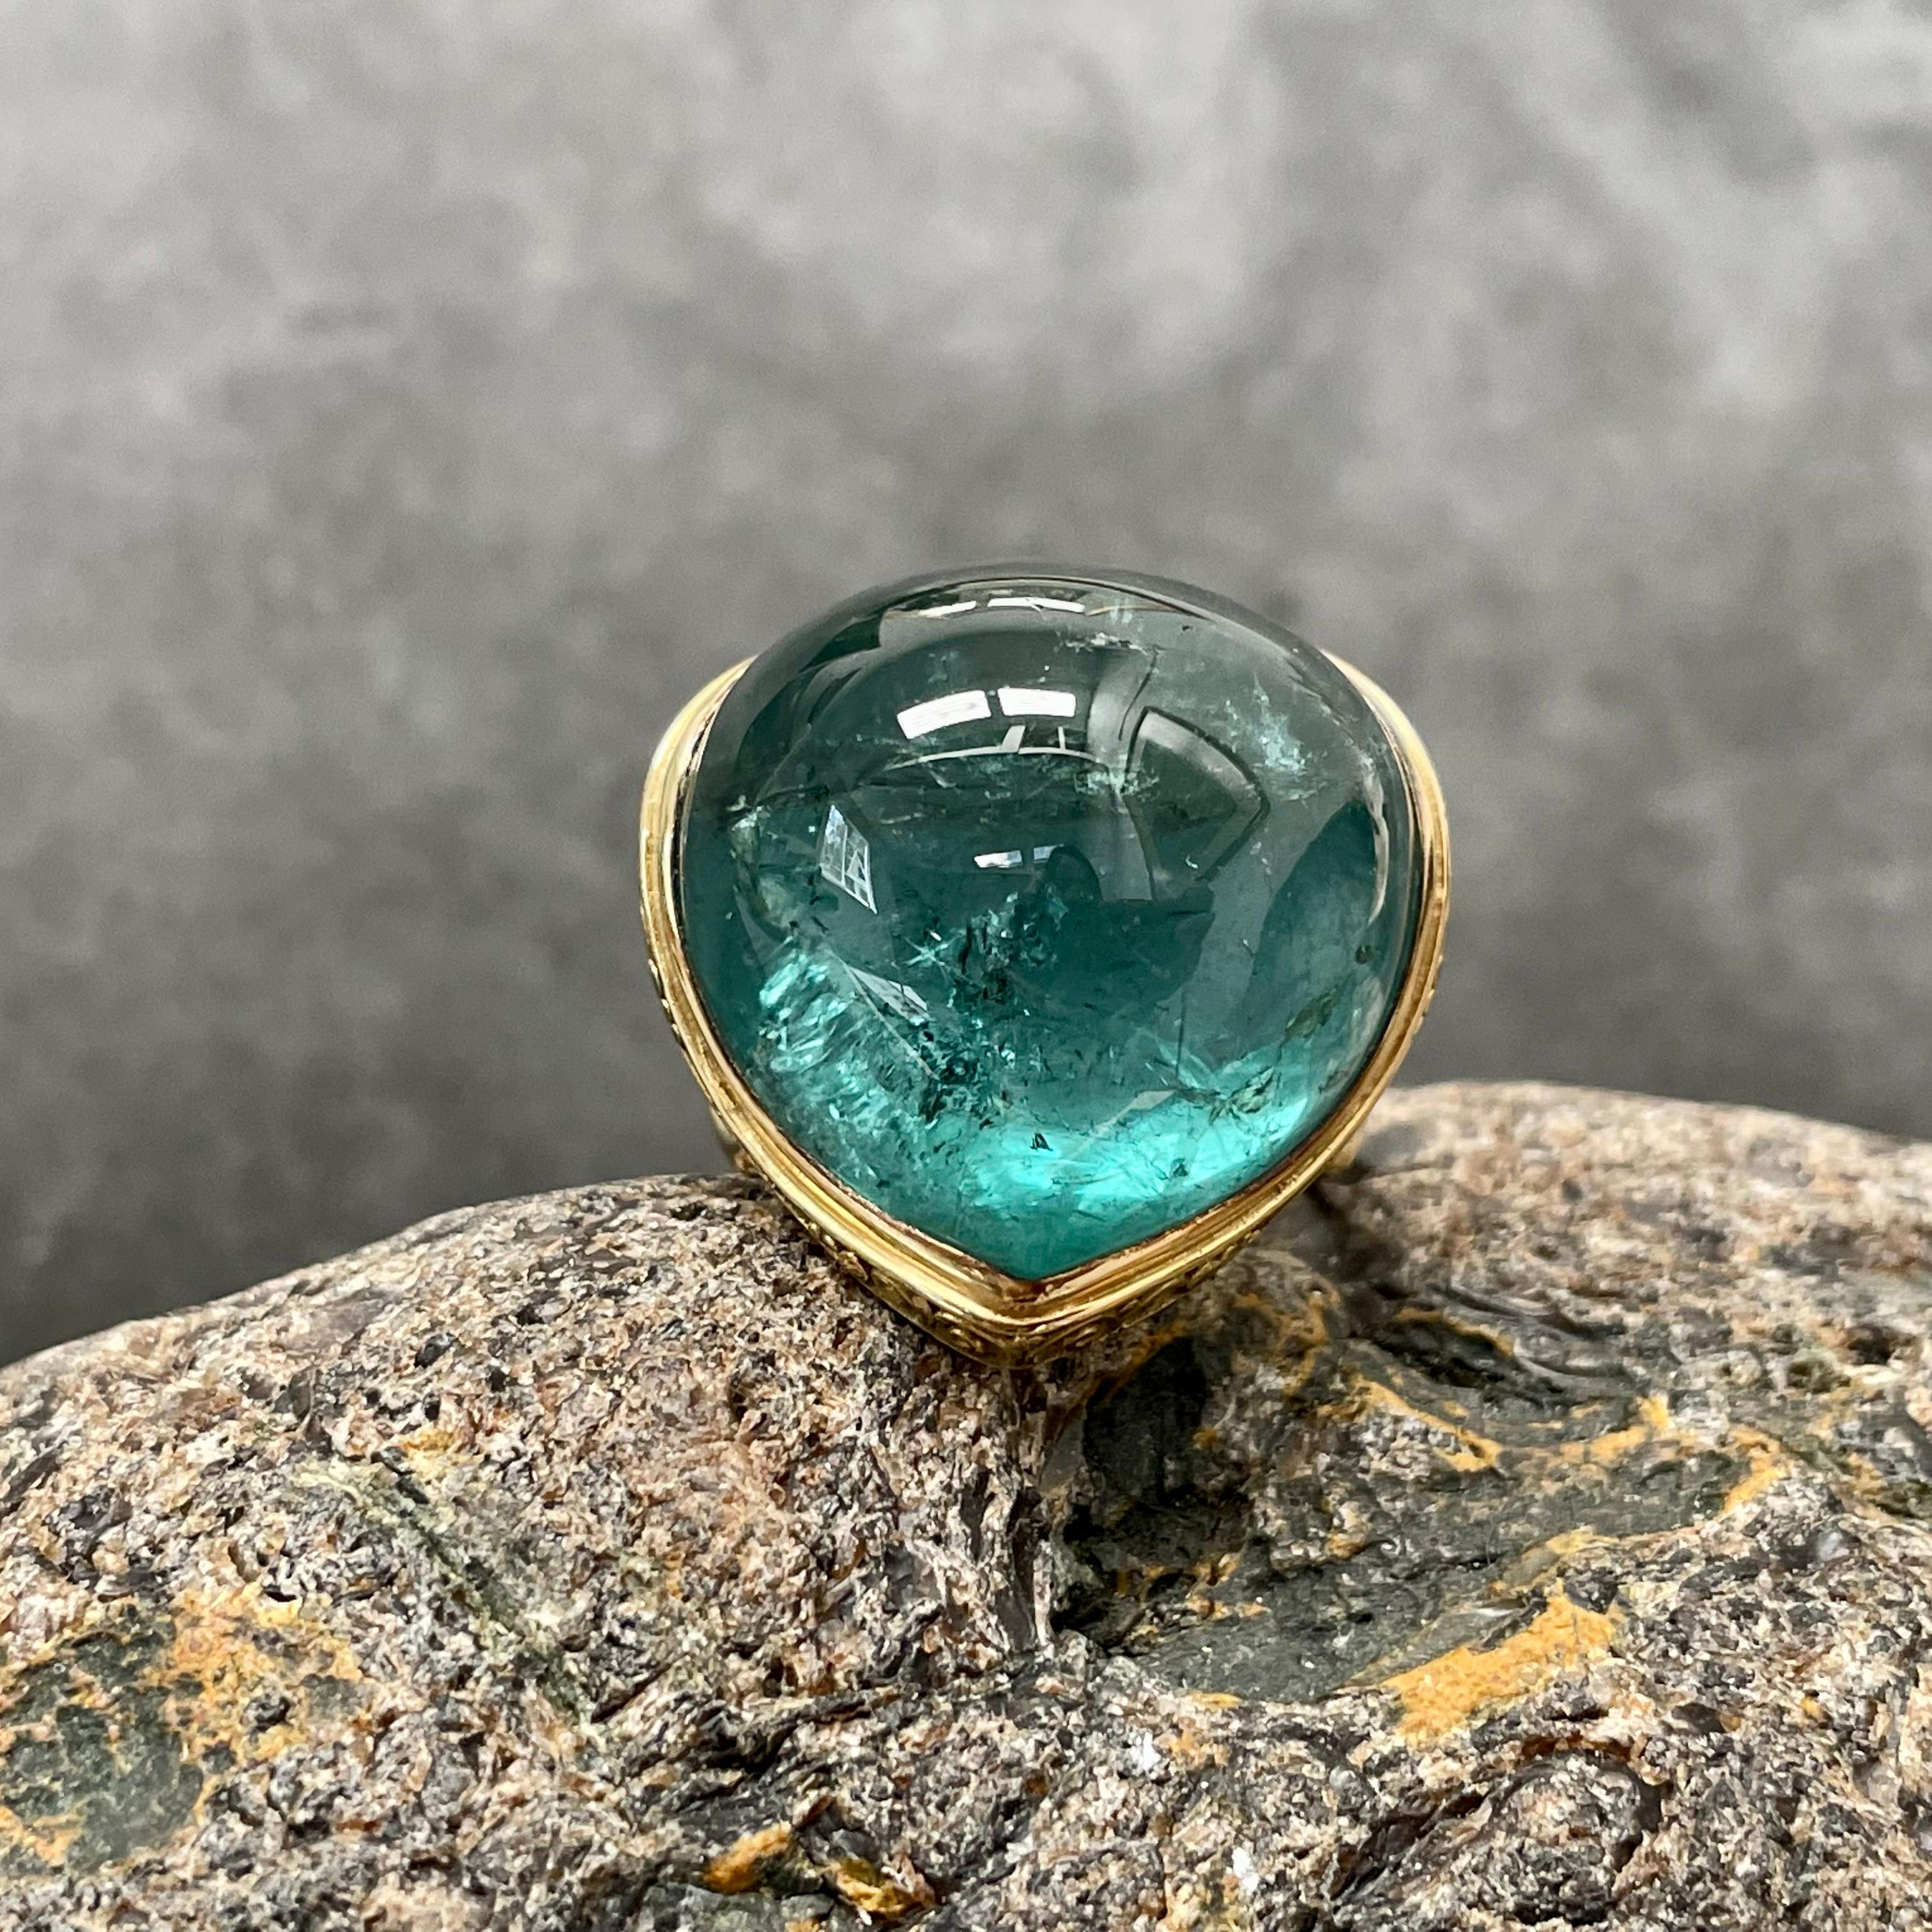 A fabulous 18 x 25 mm pear shaped cabochon Brazilian indicolite tourmaline is set within a one of kind Steven Battelle design.  Indicolite blue tourmaline is the rarest and most sought after color of tourmaline. The shank is a spiraled carved and